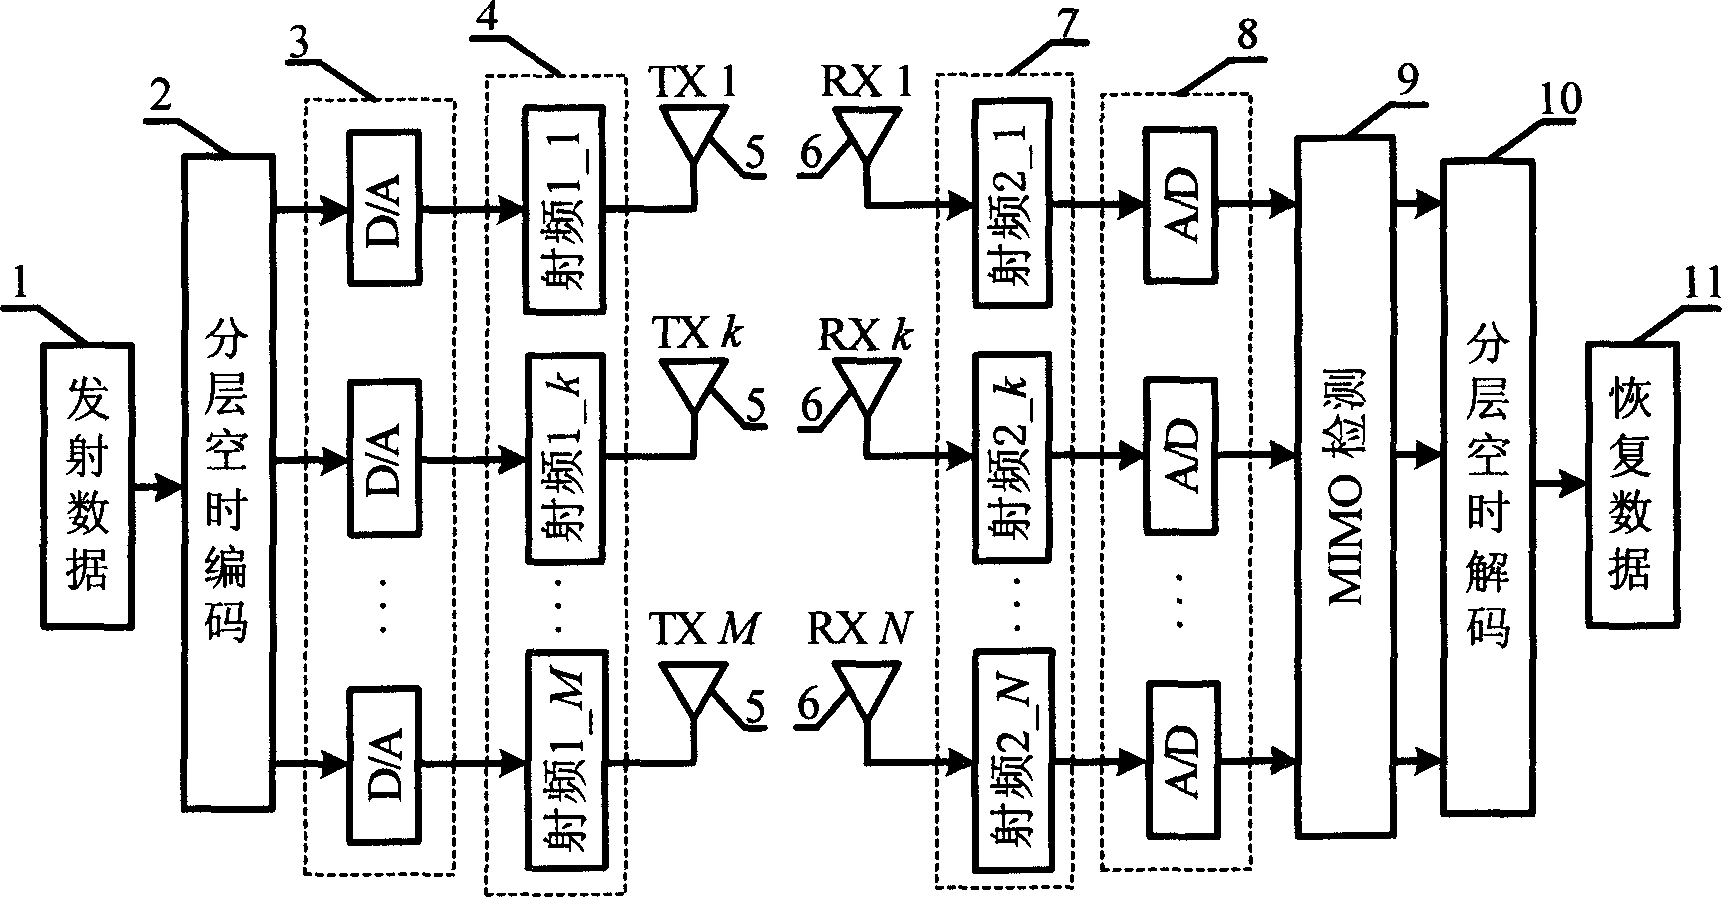 Multiple-in and multiple-out communication method of signal asynchronous transmission